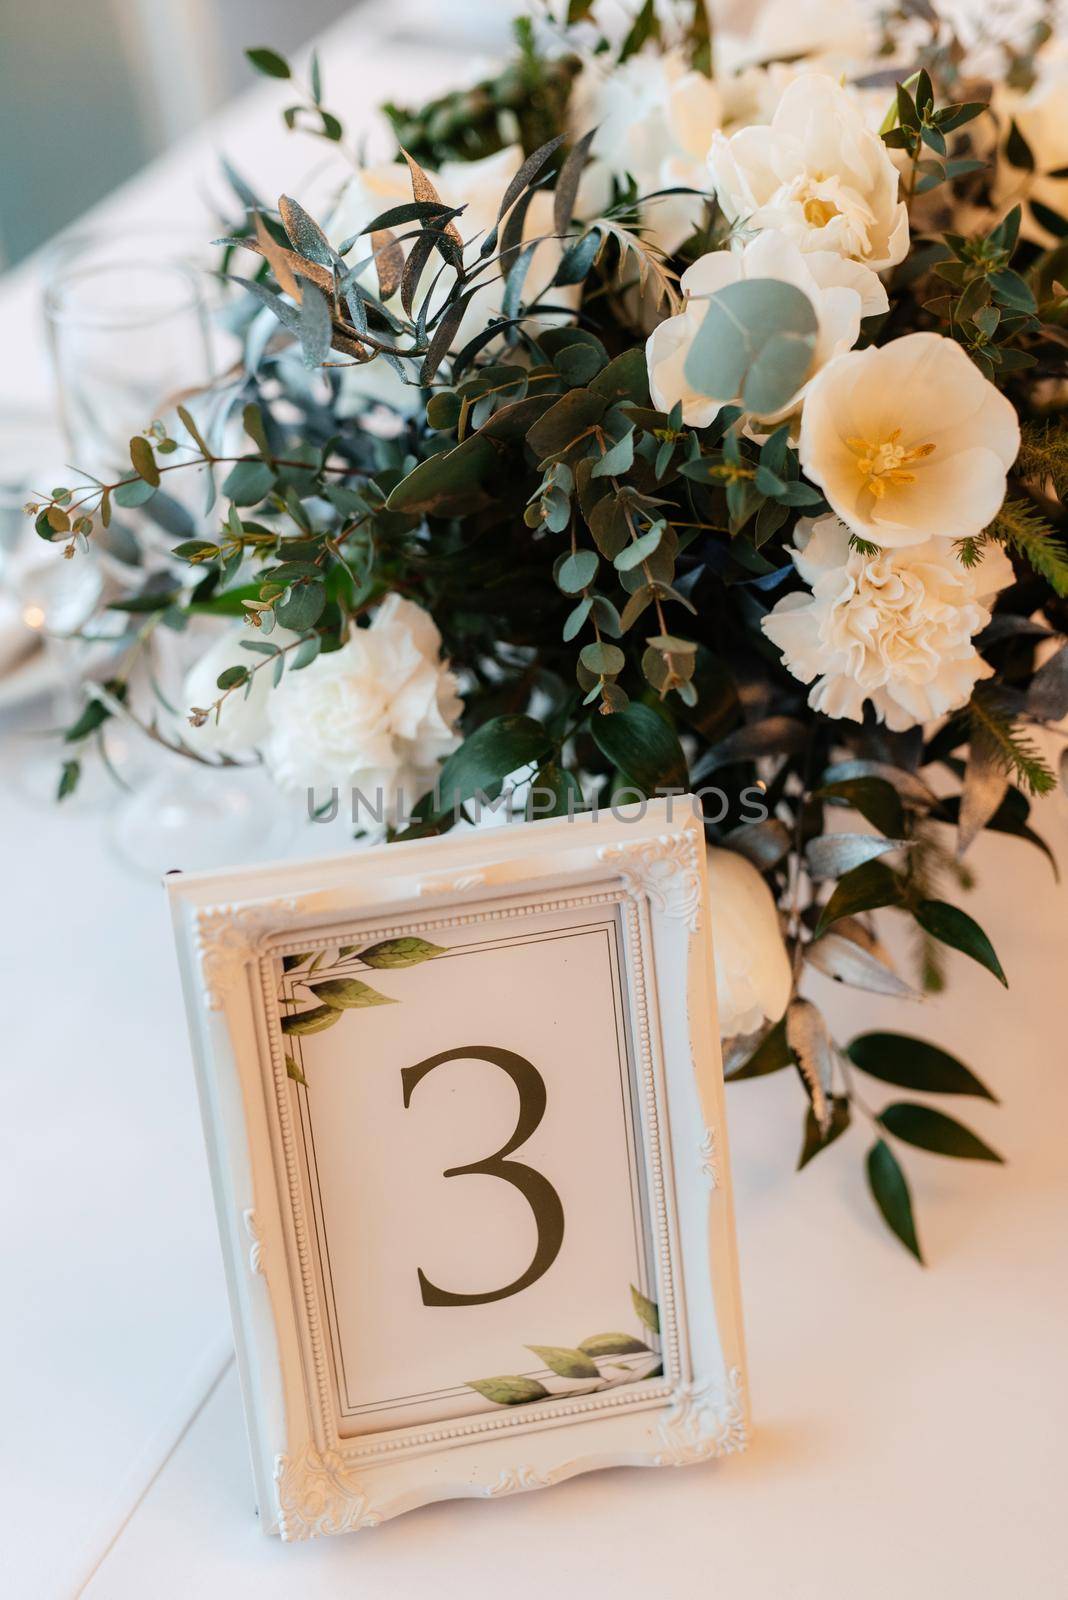 wedding decor with natural flowers and elements